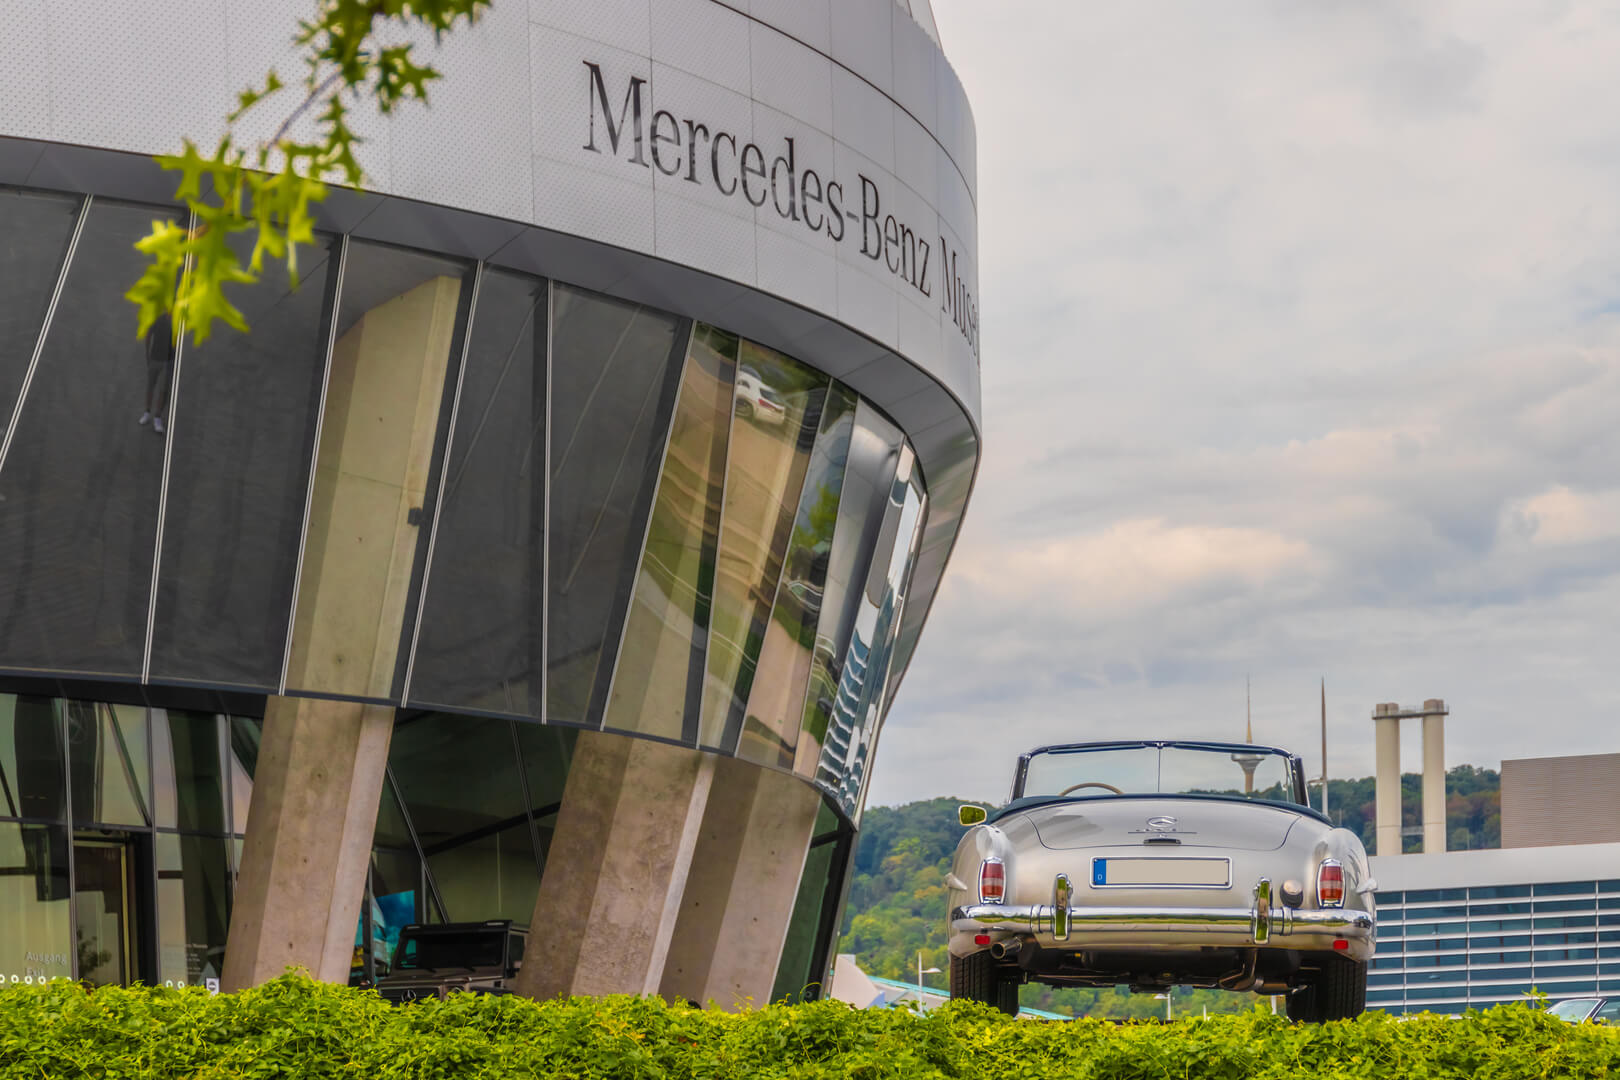 Mercedes-Benz 190 SL cabrio german oldtimer car at the Cars & Coffee event at the Mercedes-Benz Museum.